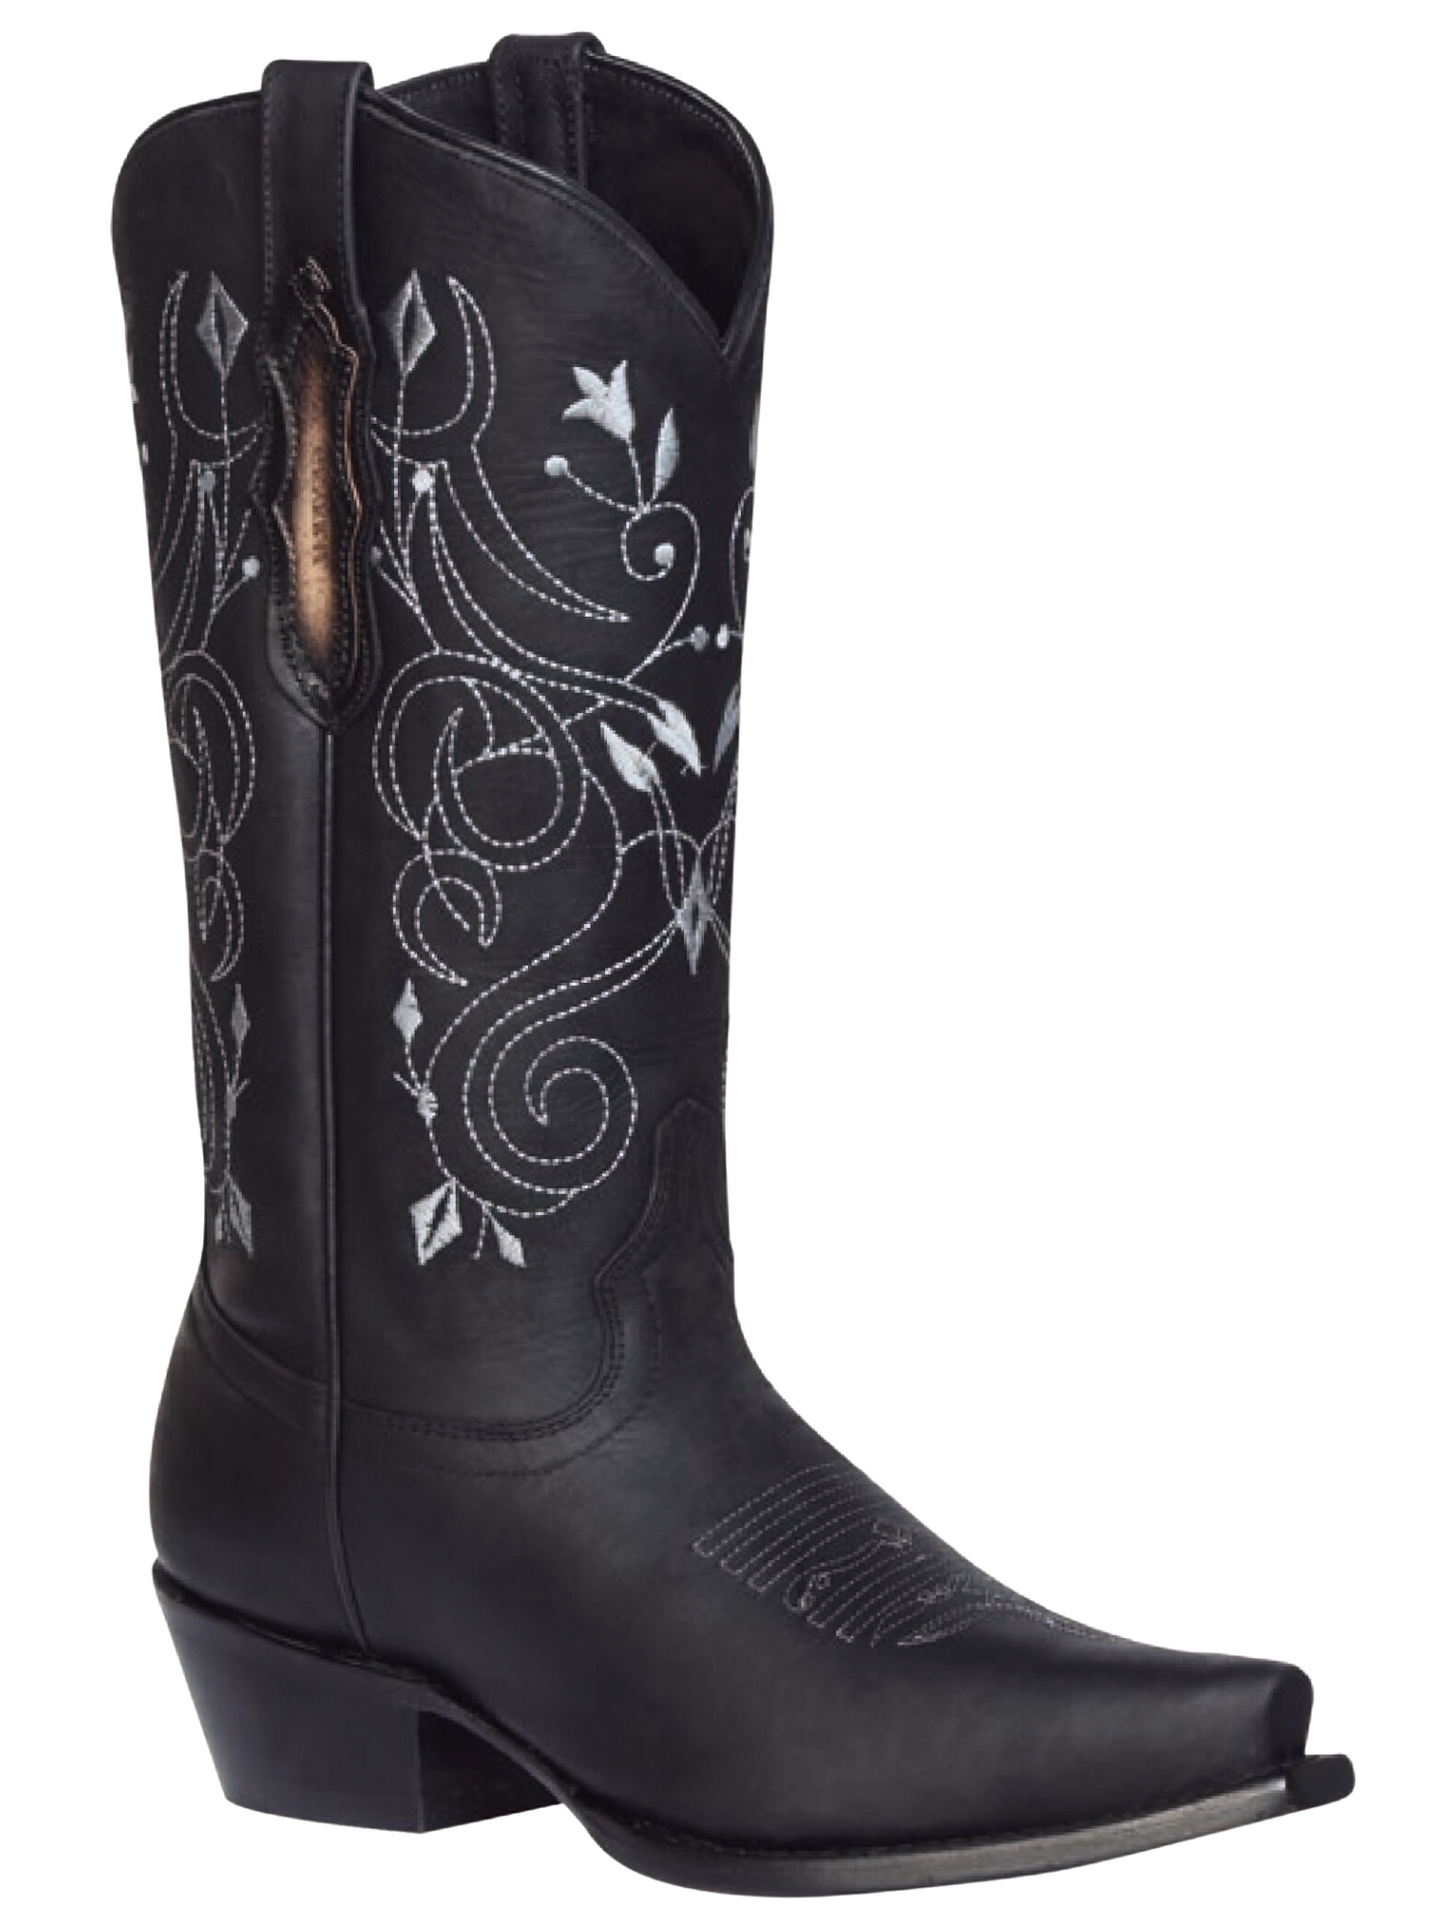 Genuine Leather Classic Retro Cowboy Boots for Women 'El General' - ID: 34514